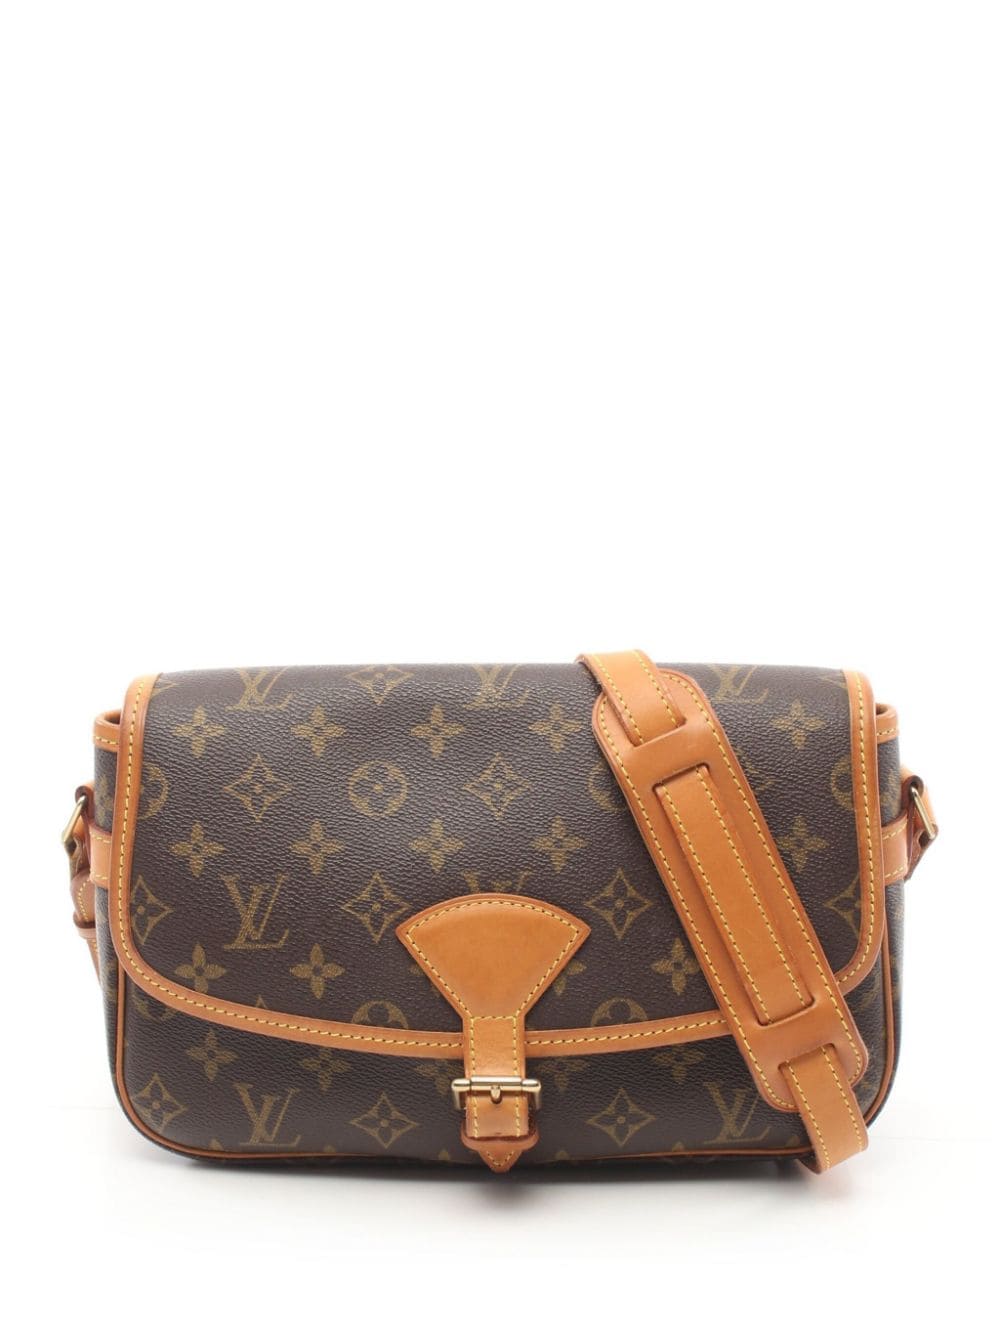 Louis Vuitton Pre-Owned 2001 Sologne Schultertasche - Braun von Louis Vuitton Pre-Owned